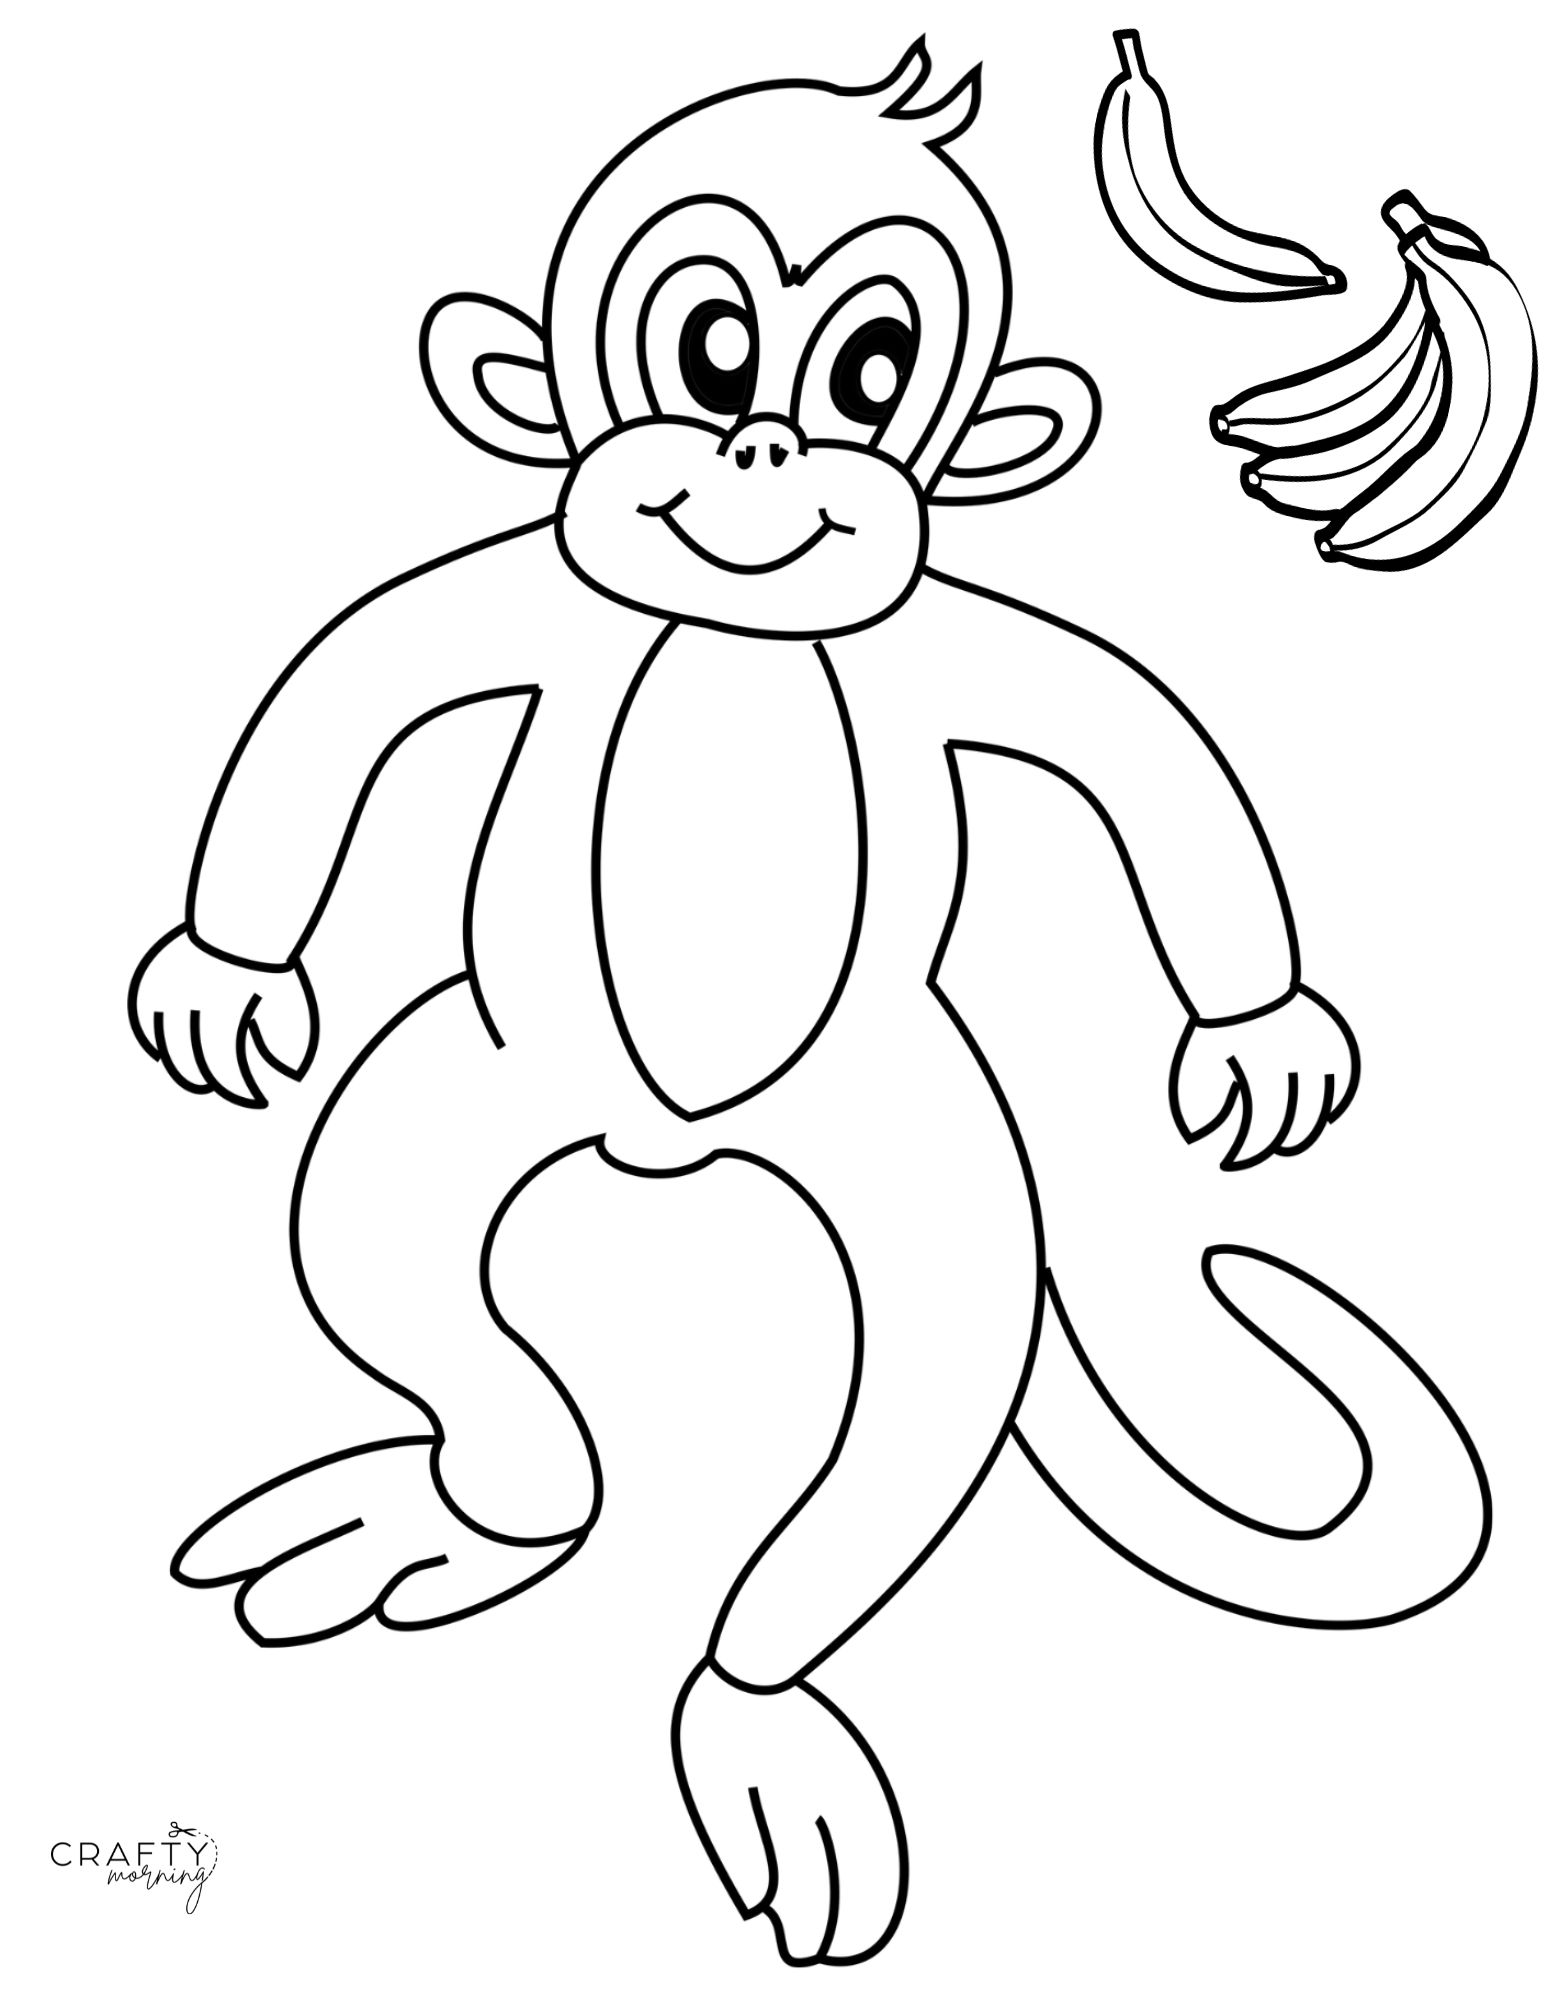 Monkey On A Tree. Ink Black And White Drawing Stock Photo, Picture and  Royalty Free Image. Image 138803449.